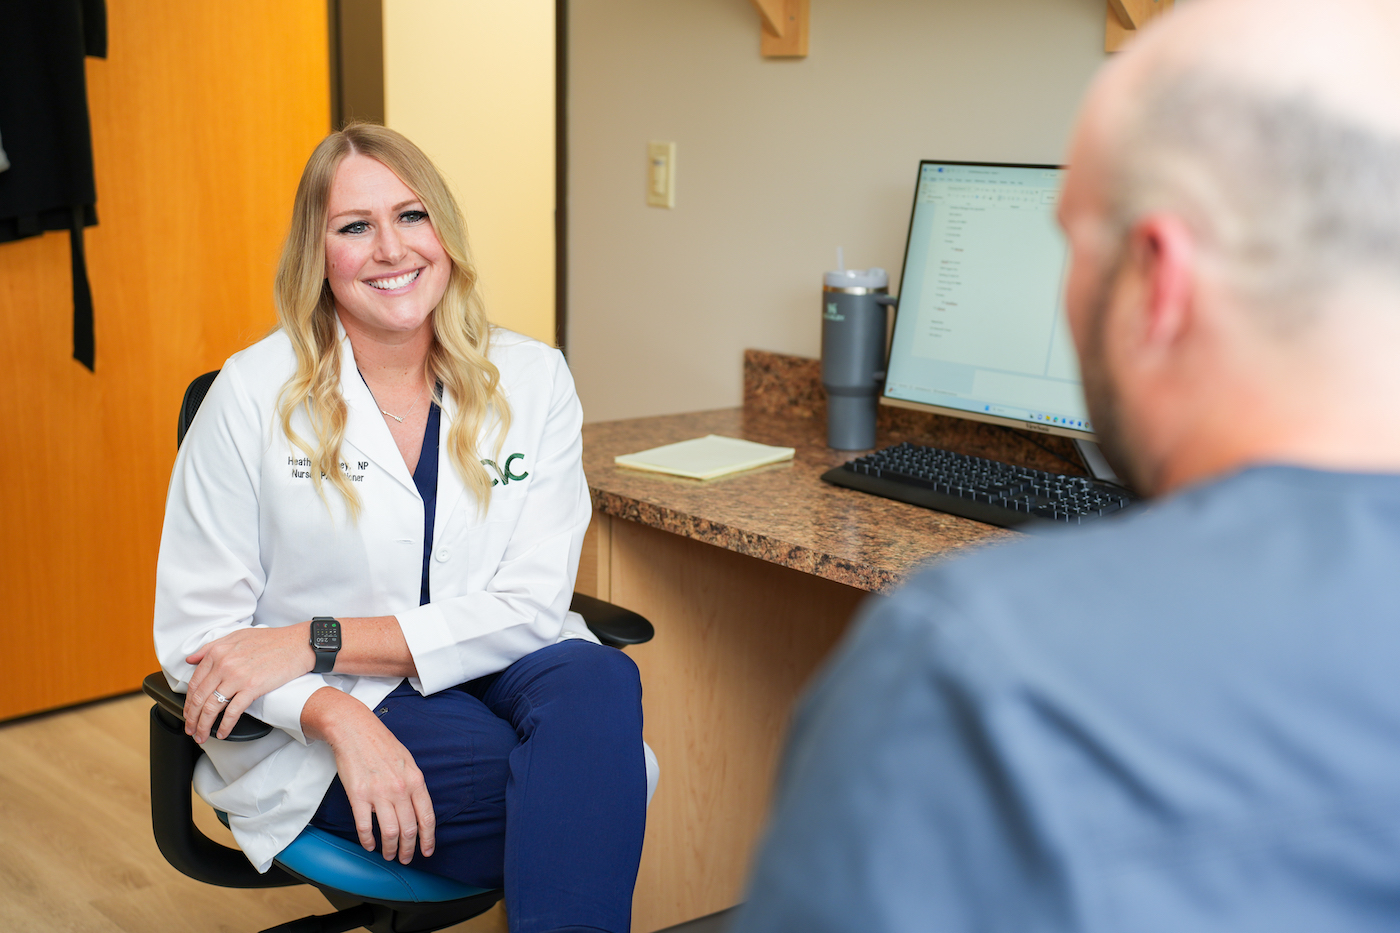 Nurse Practitioner Heather Richey has conversation with office manager in bright, sunny office.